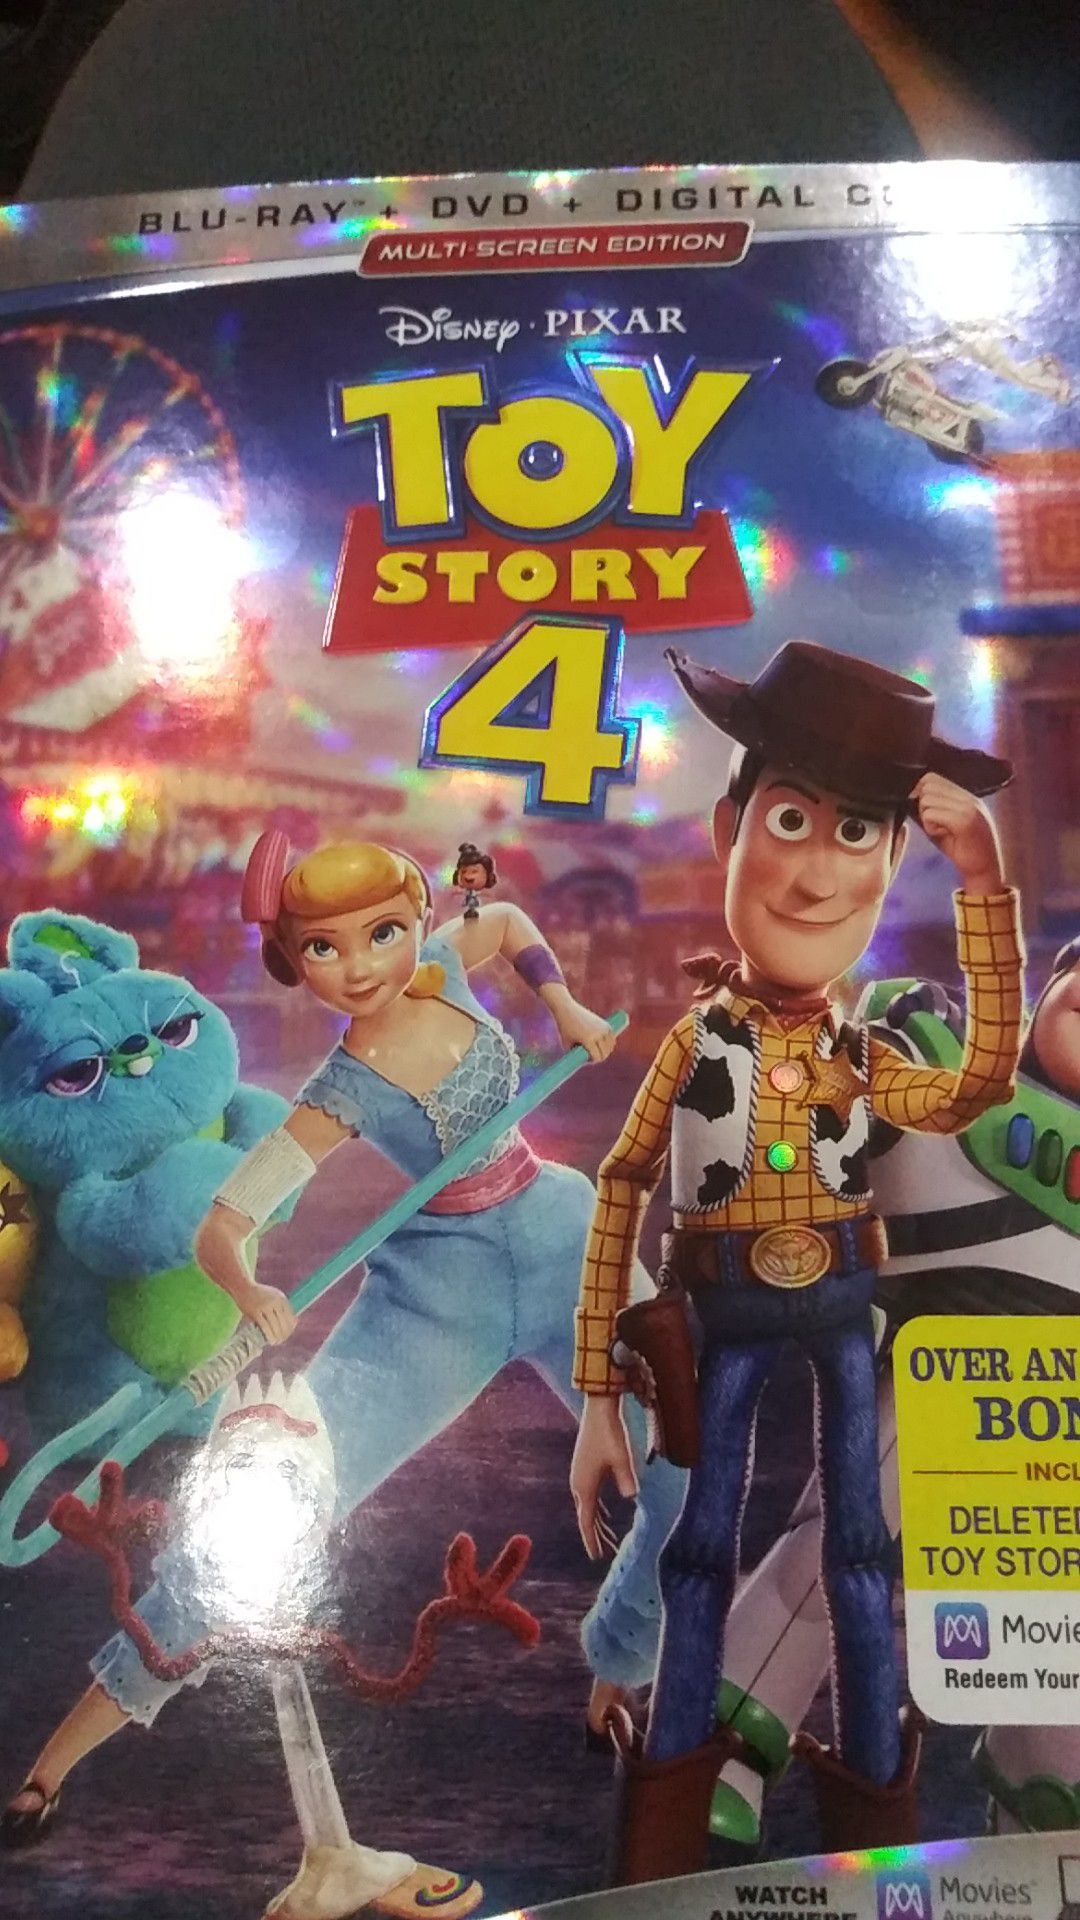 Toy story 4 brand new